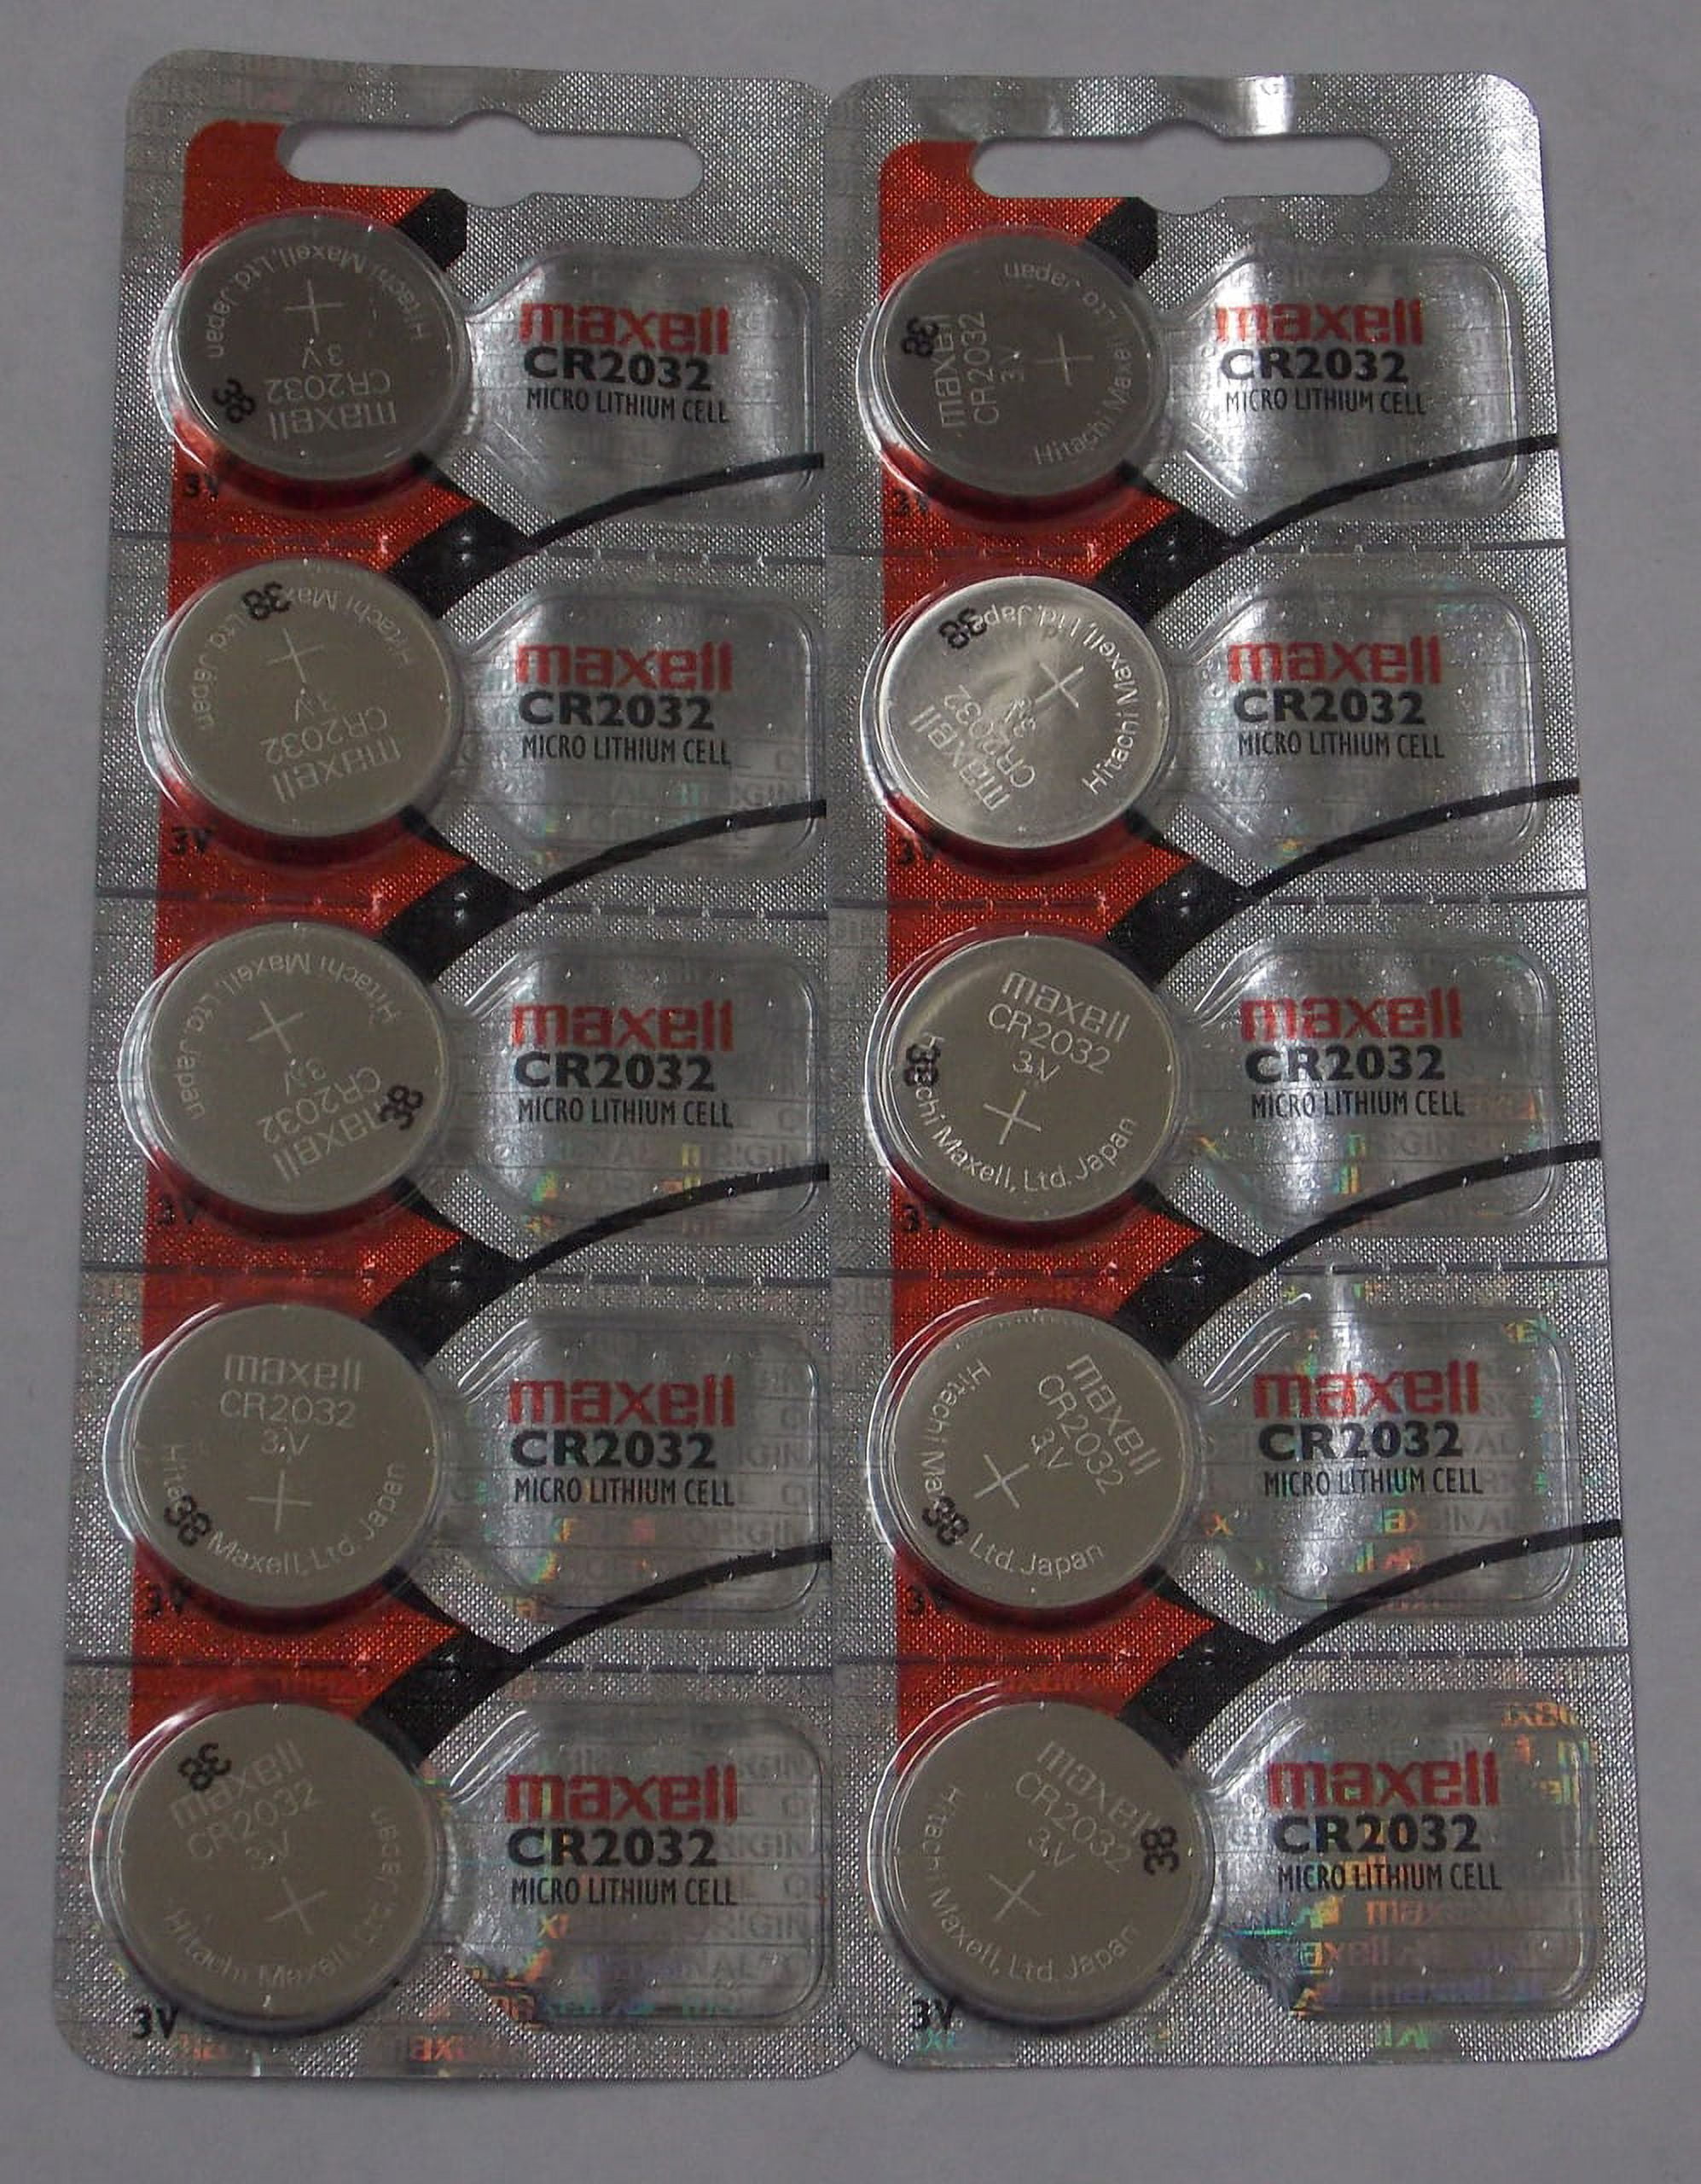 Maxell CR2032 220mAh 3V Lithium Primary Coin Cell Battery